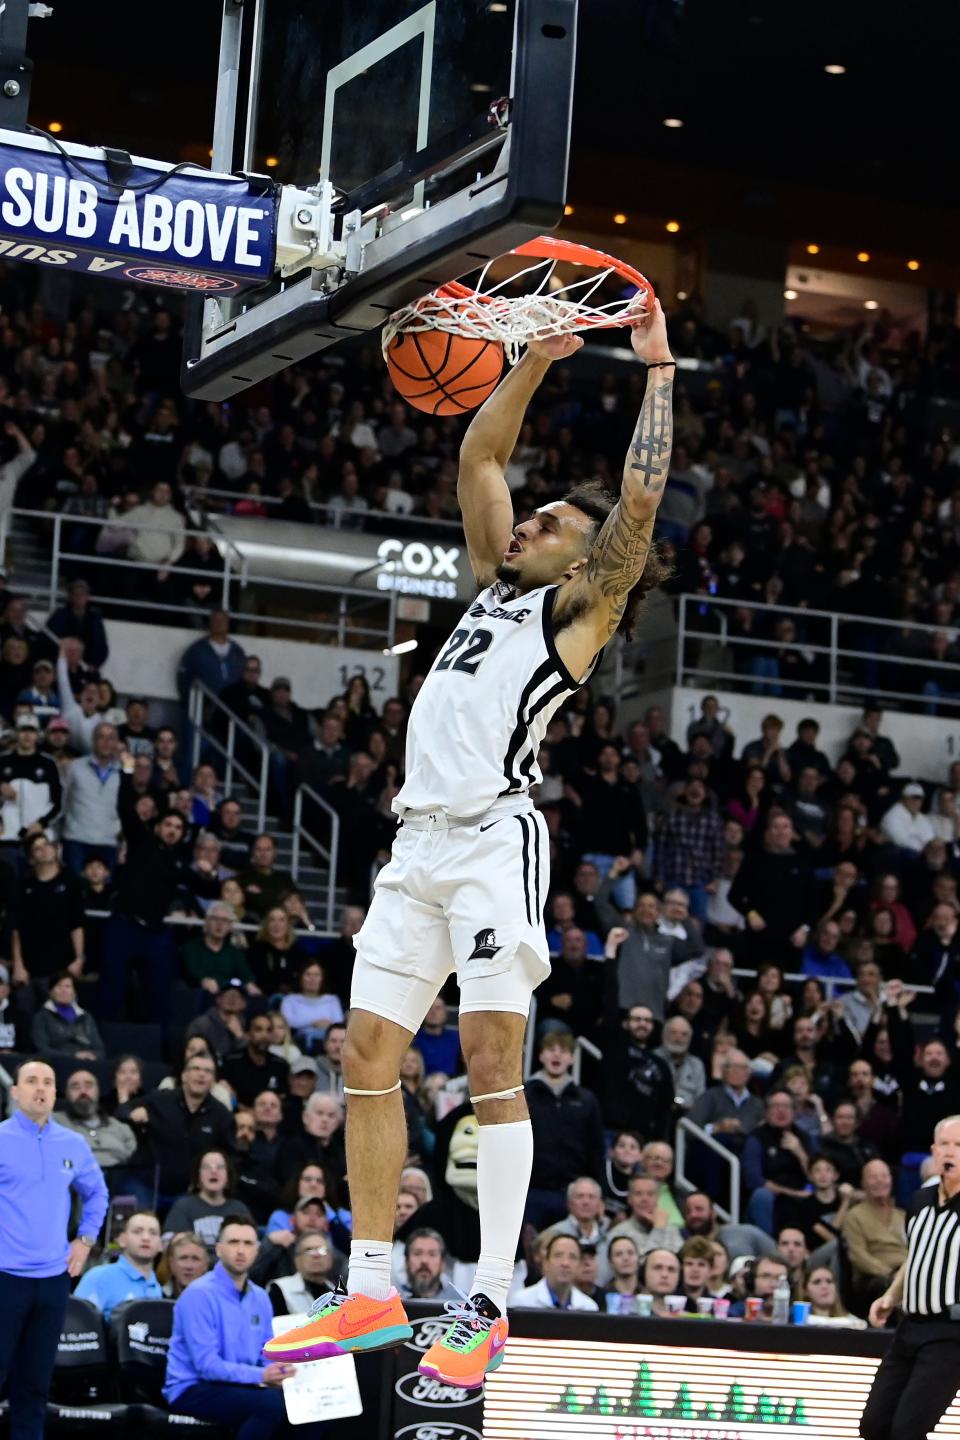 Dec 2, 2023; Providence, Rhode Island, USA; Providence Friars guard Devin Carter (22) dunks the ball against the Rhode Island Rams during the first half at Amica Mutual Pavilion. Mandatory Credit: Eric Canha-USA TODAY Sports